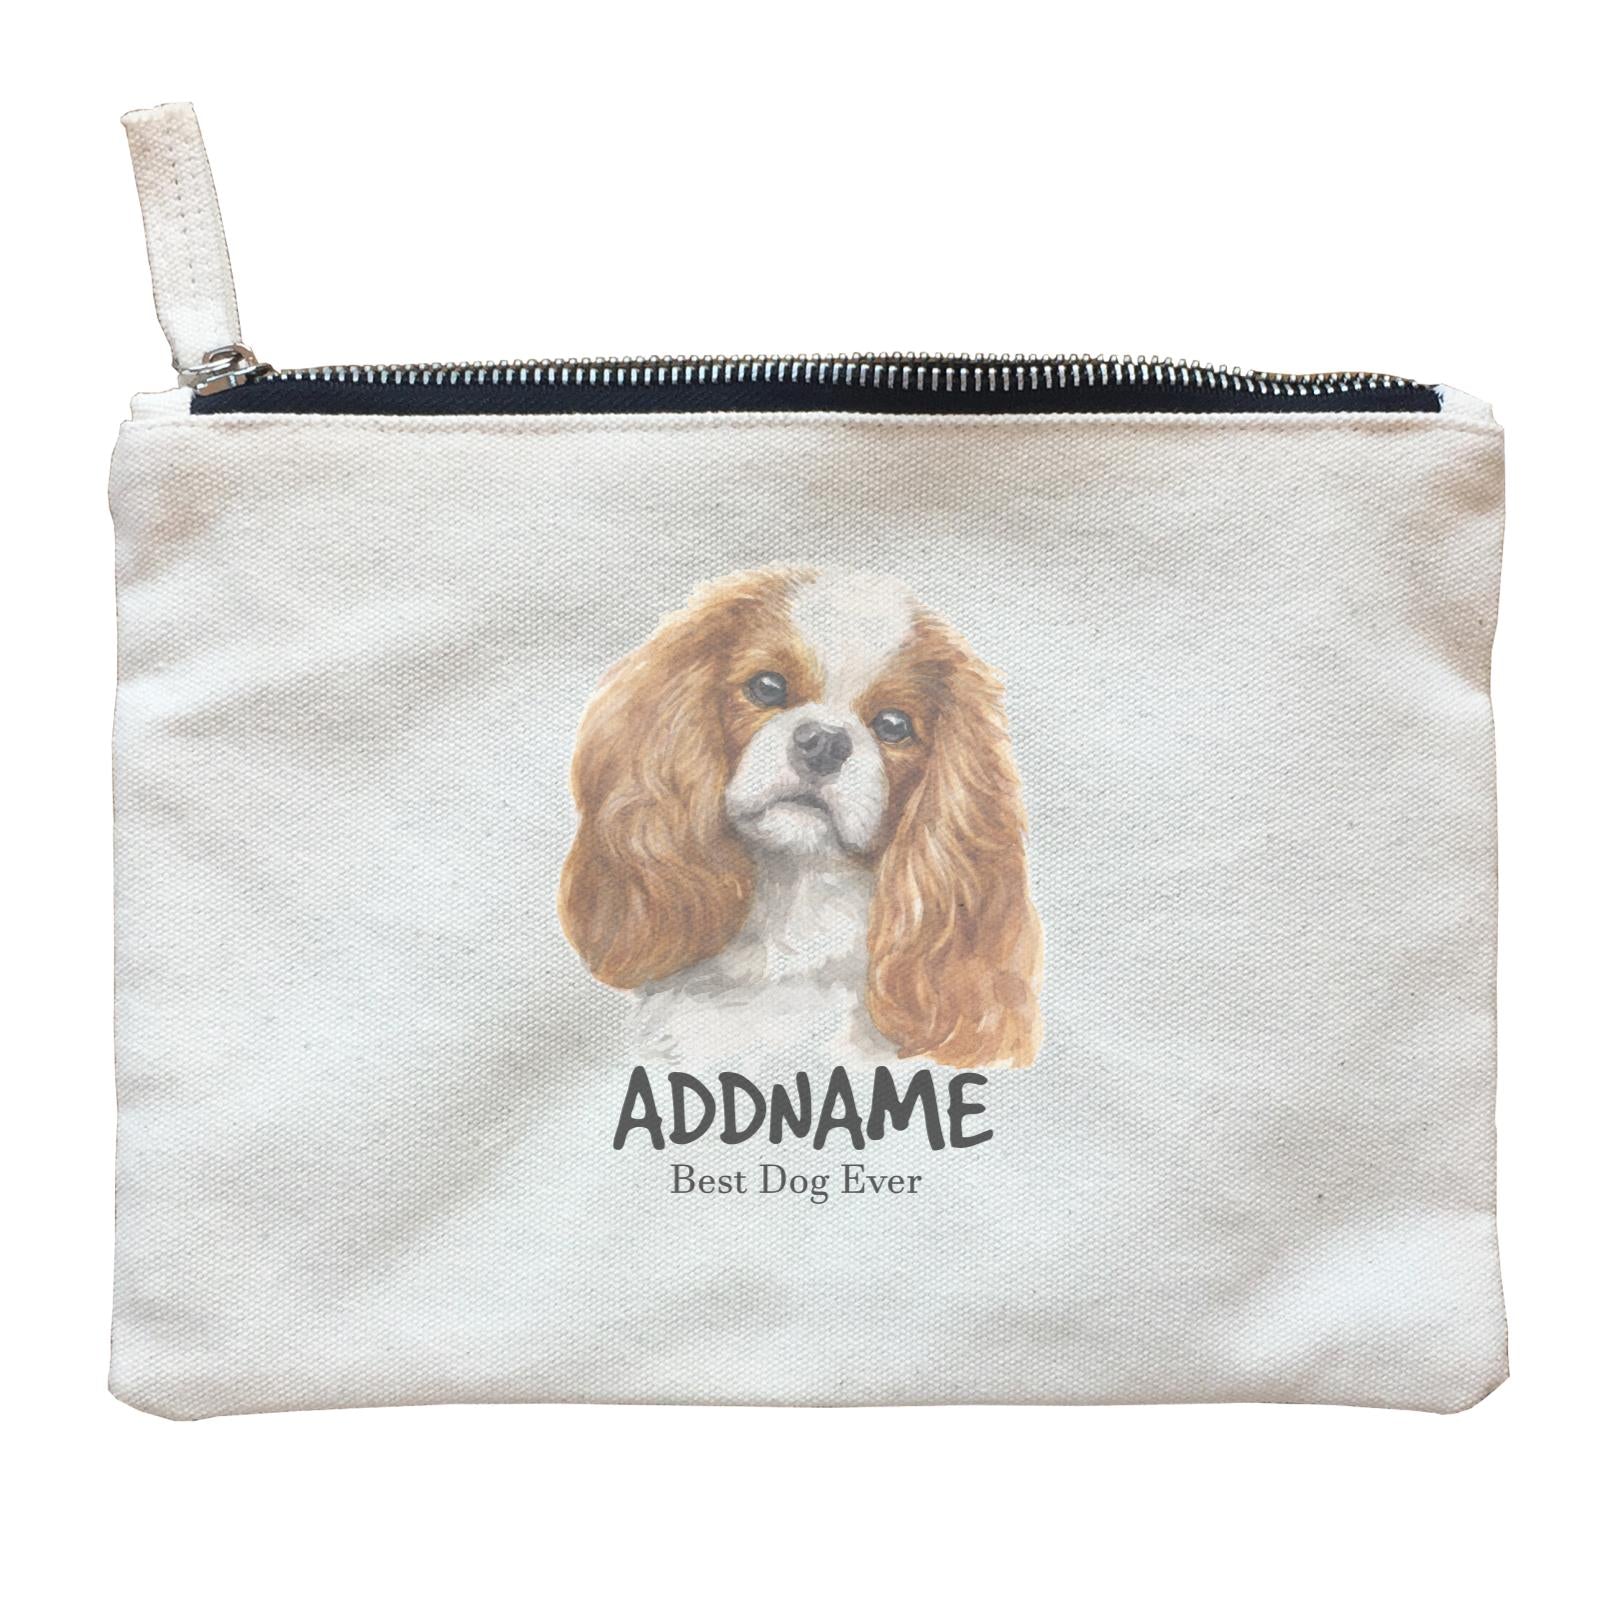 Watercolor Dog King Charles Spaniel Best Dog Ever Addname Zipper Pouch